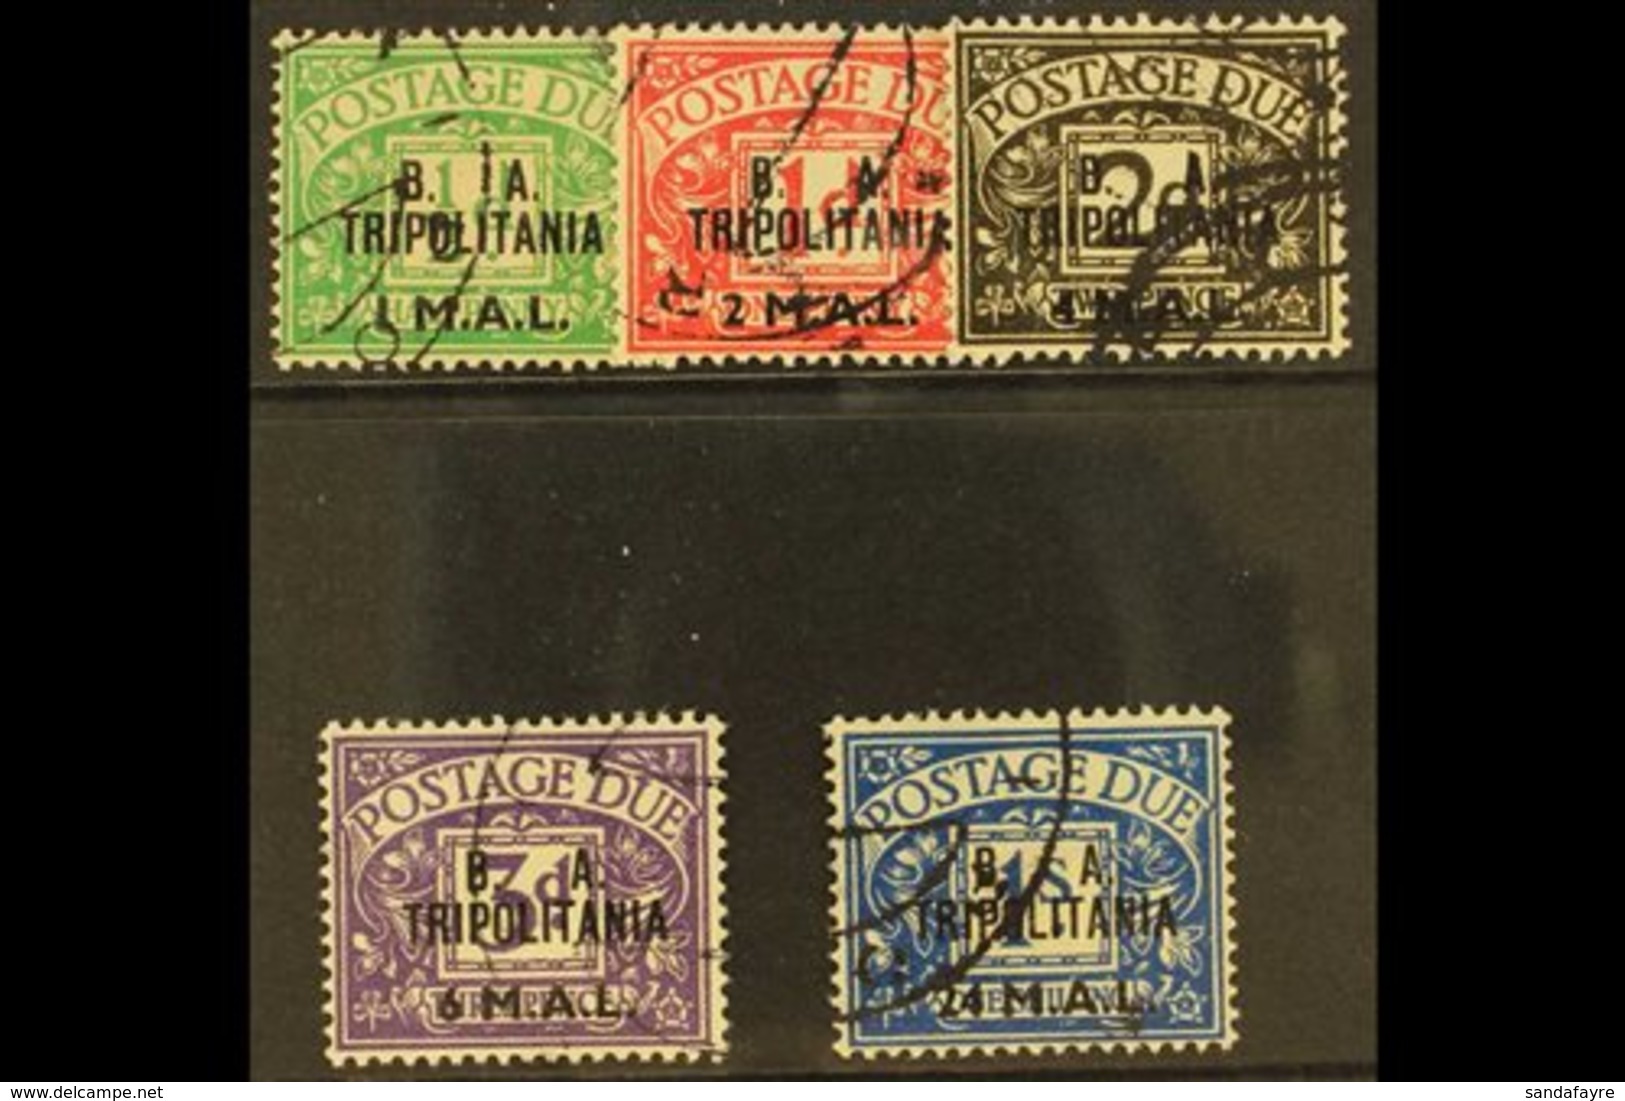 \Y TRIPOLITANIA\Y POSTAGE DUES 1950 Set Complete, SG TD6/10, Very Fine Used. Scarce Set. (5 Stamps) For More Images, Ple - Italian Eastern Africa